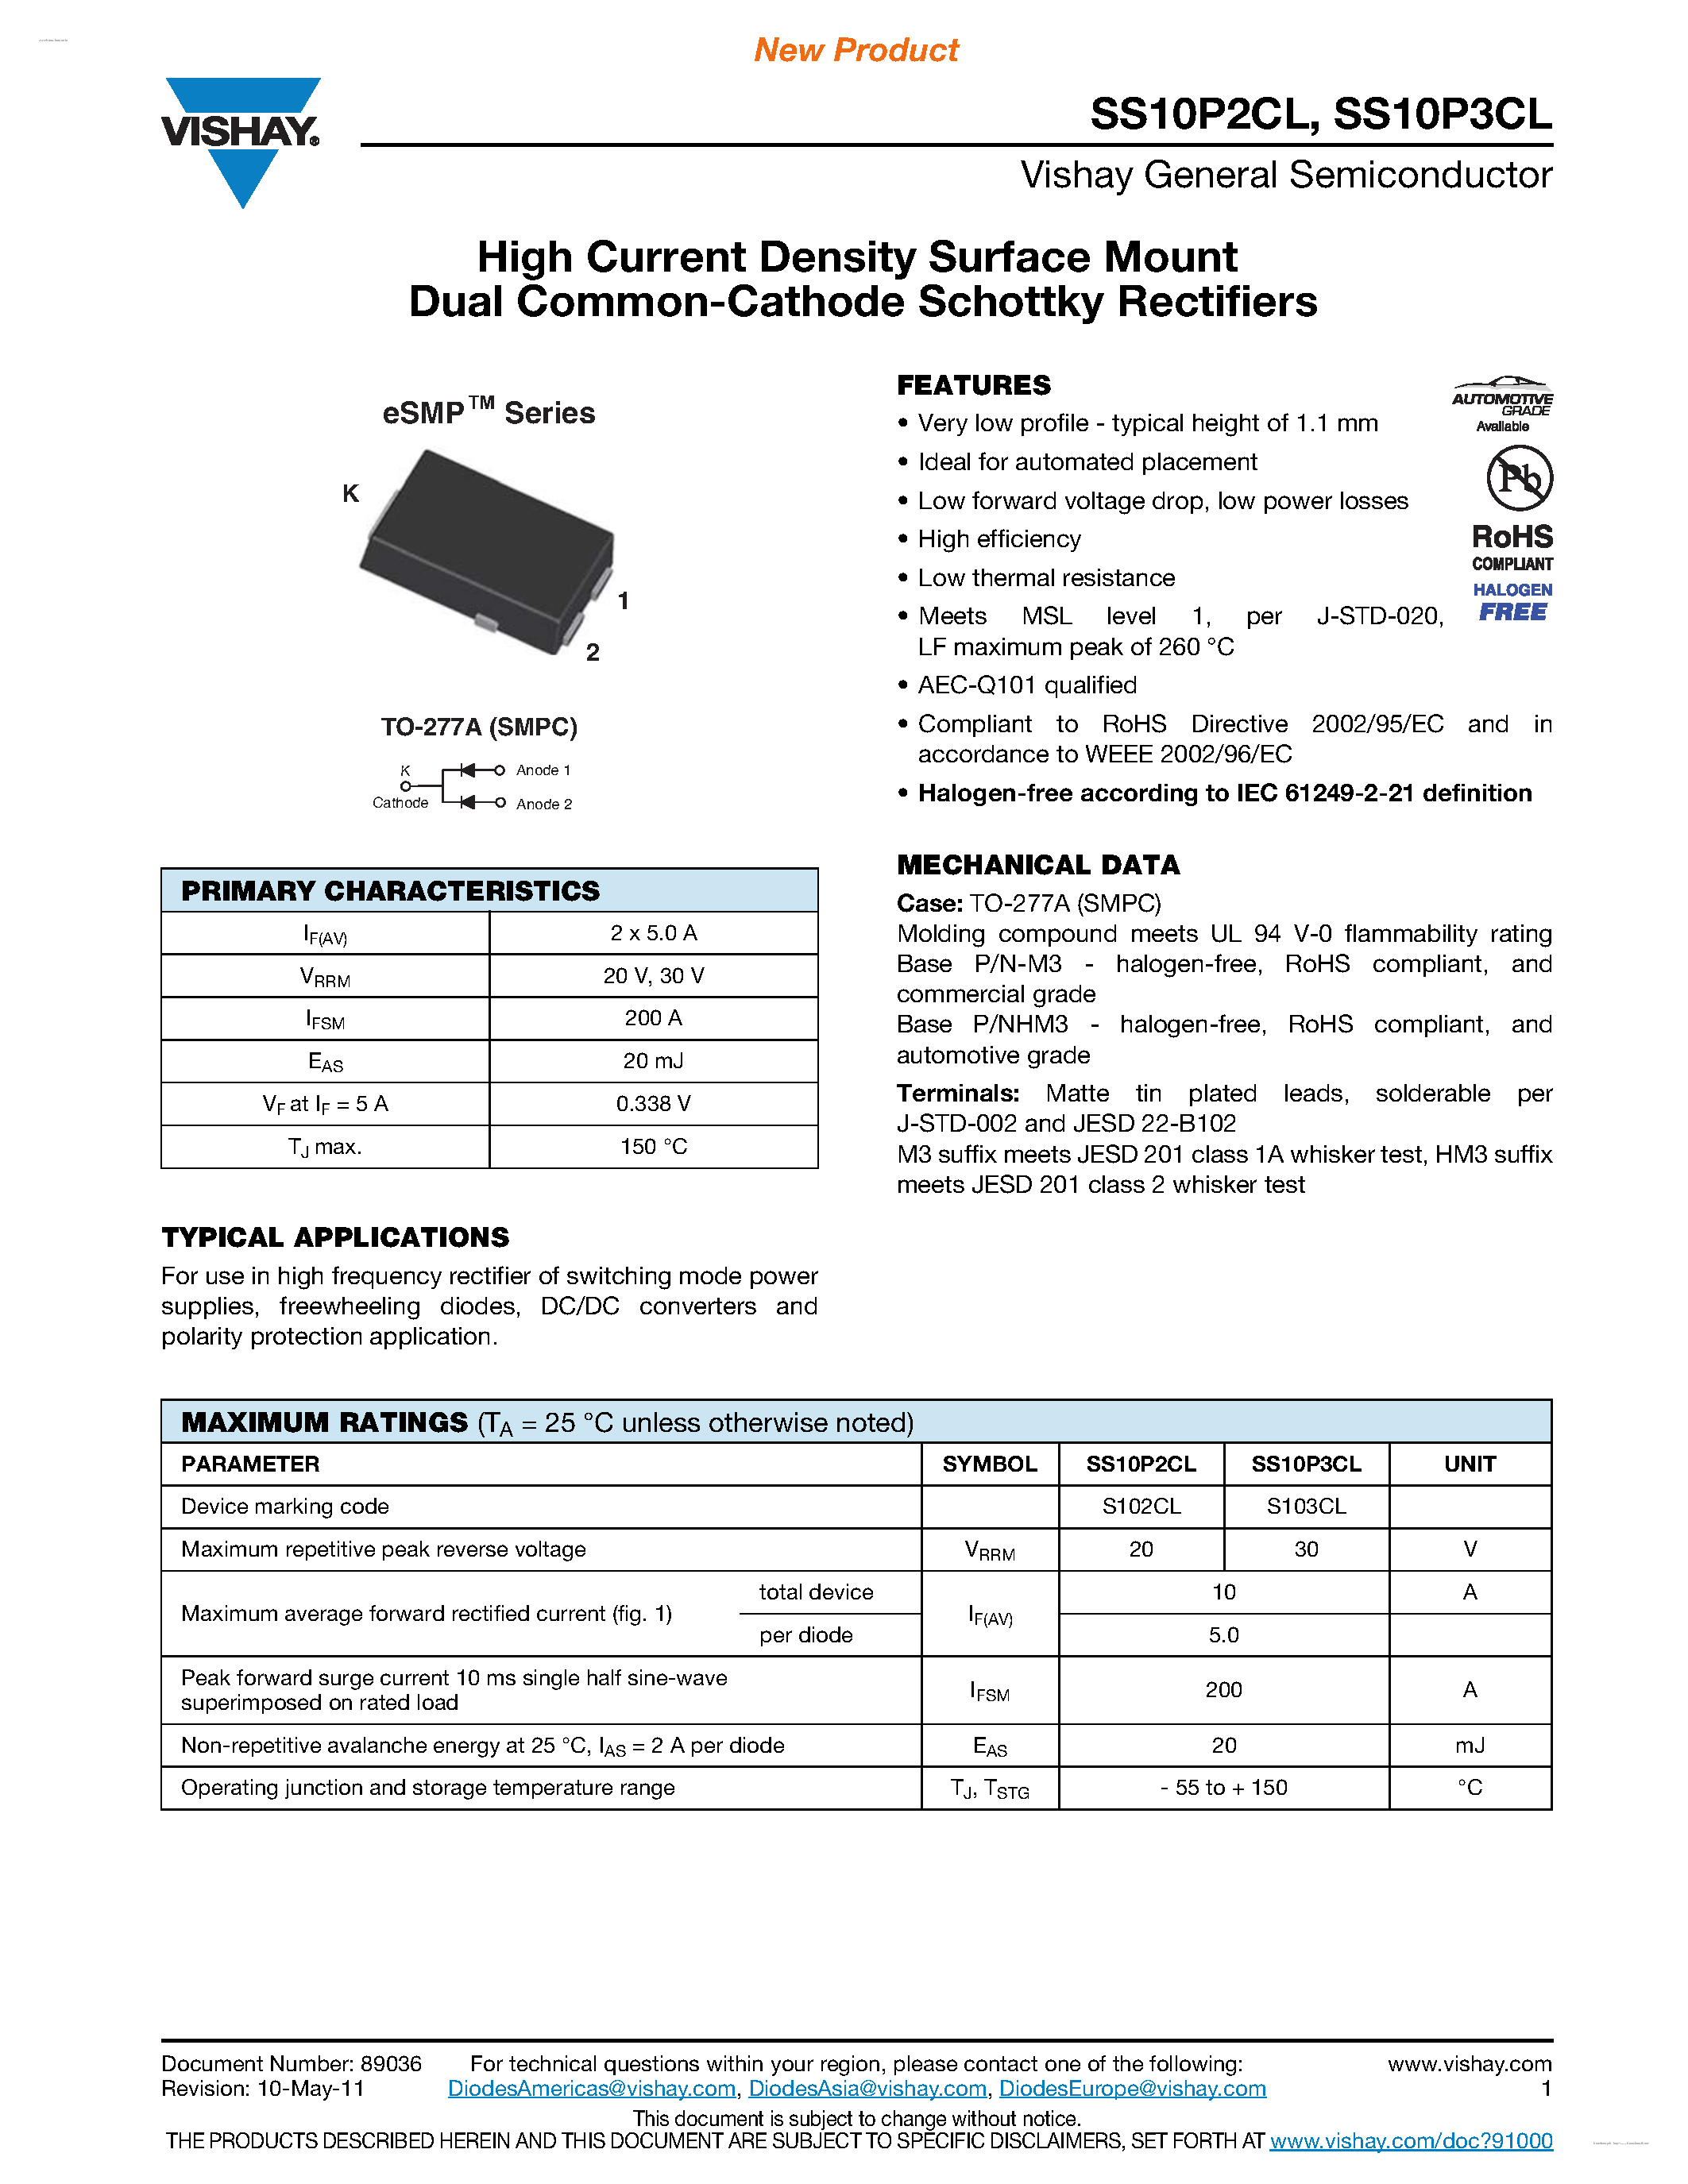 Даташит SS10P2CL - (SS10P2CL / SS10P3CL) High Current Density Surface Mount Dual Common-Cathode Schottky Rectifiers страница 1